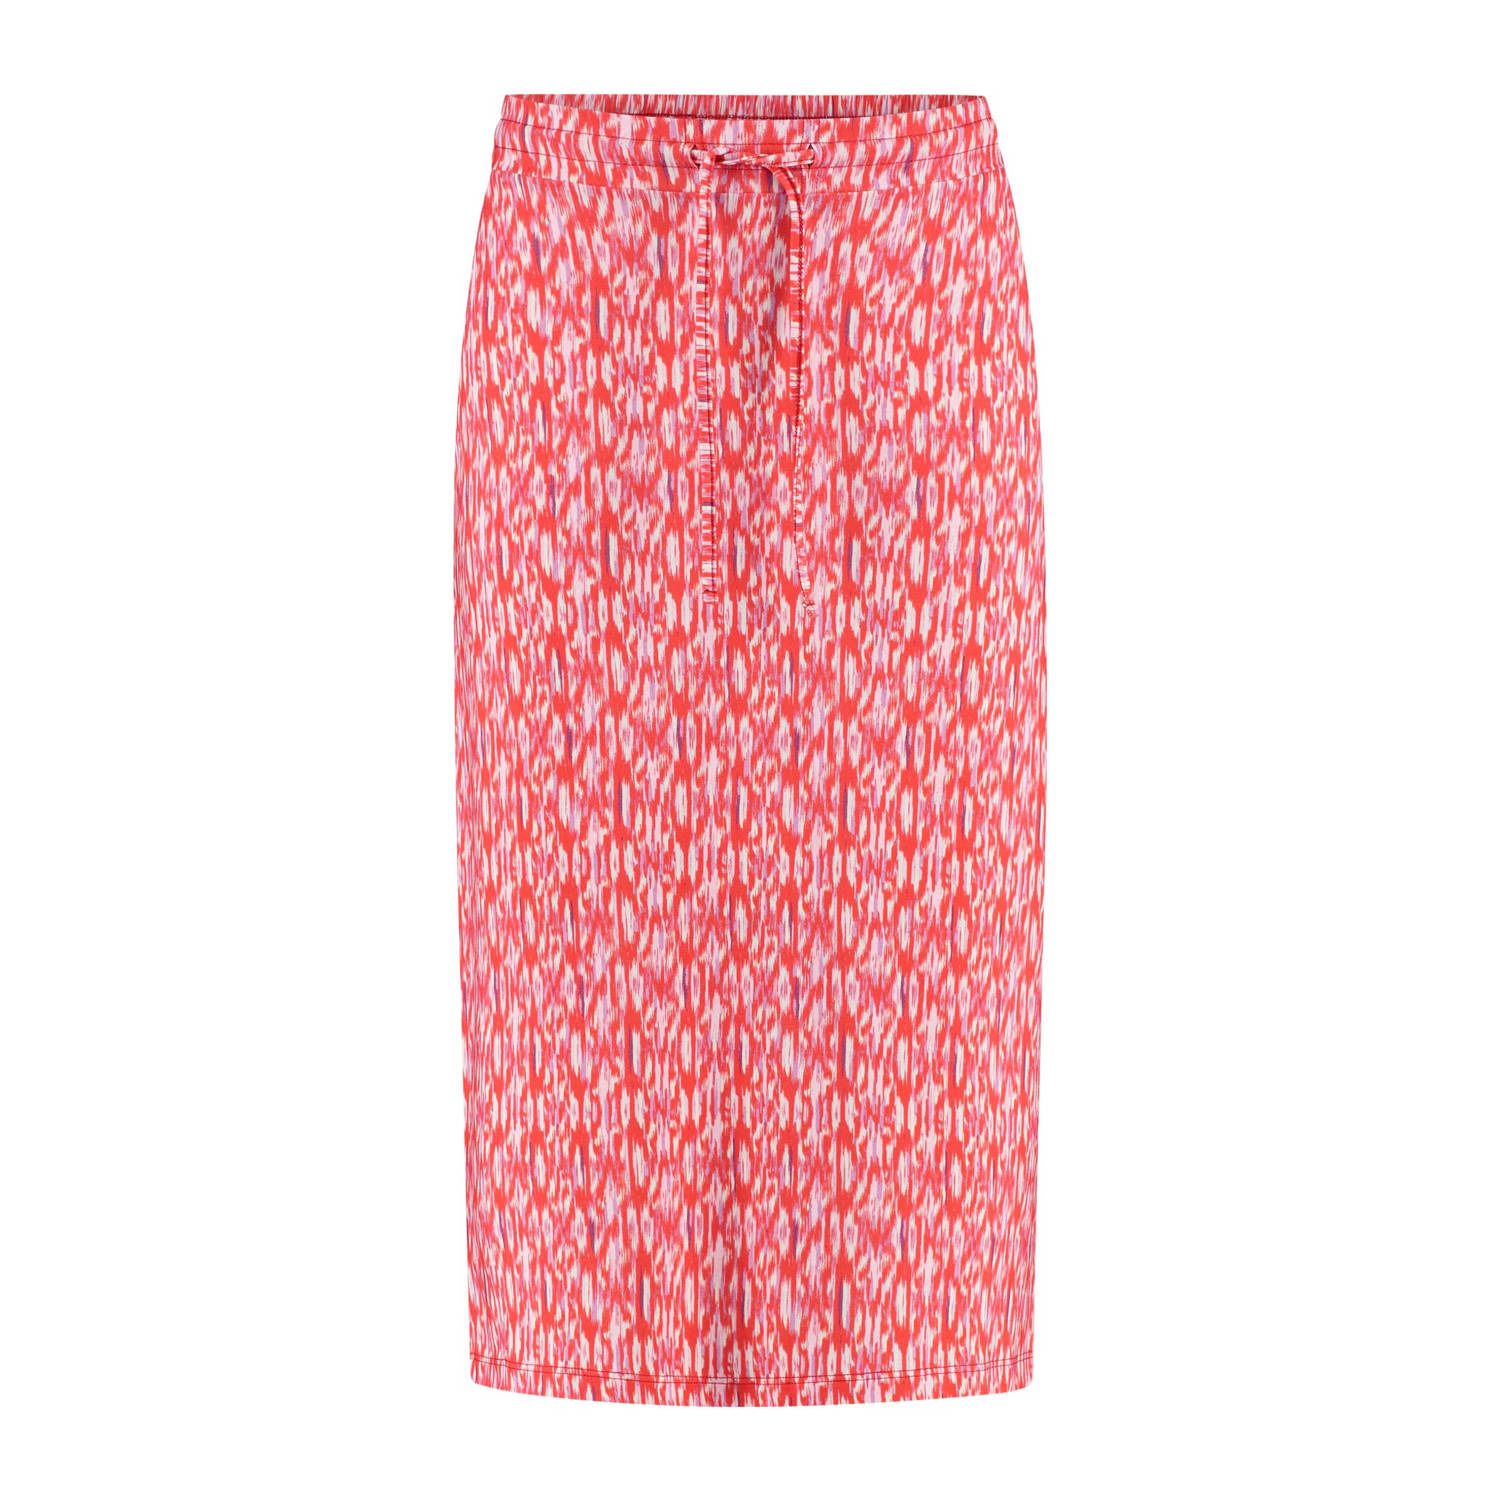 Expresso midi rok met all over print rood wit